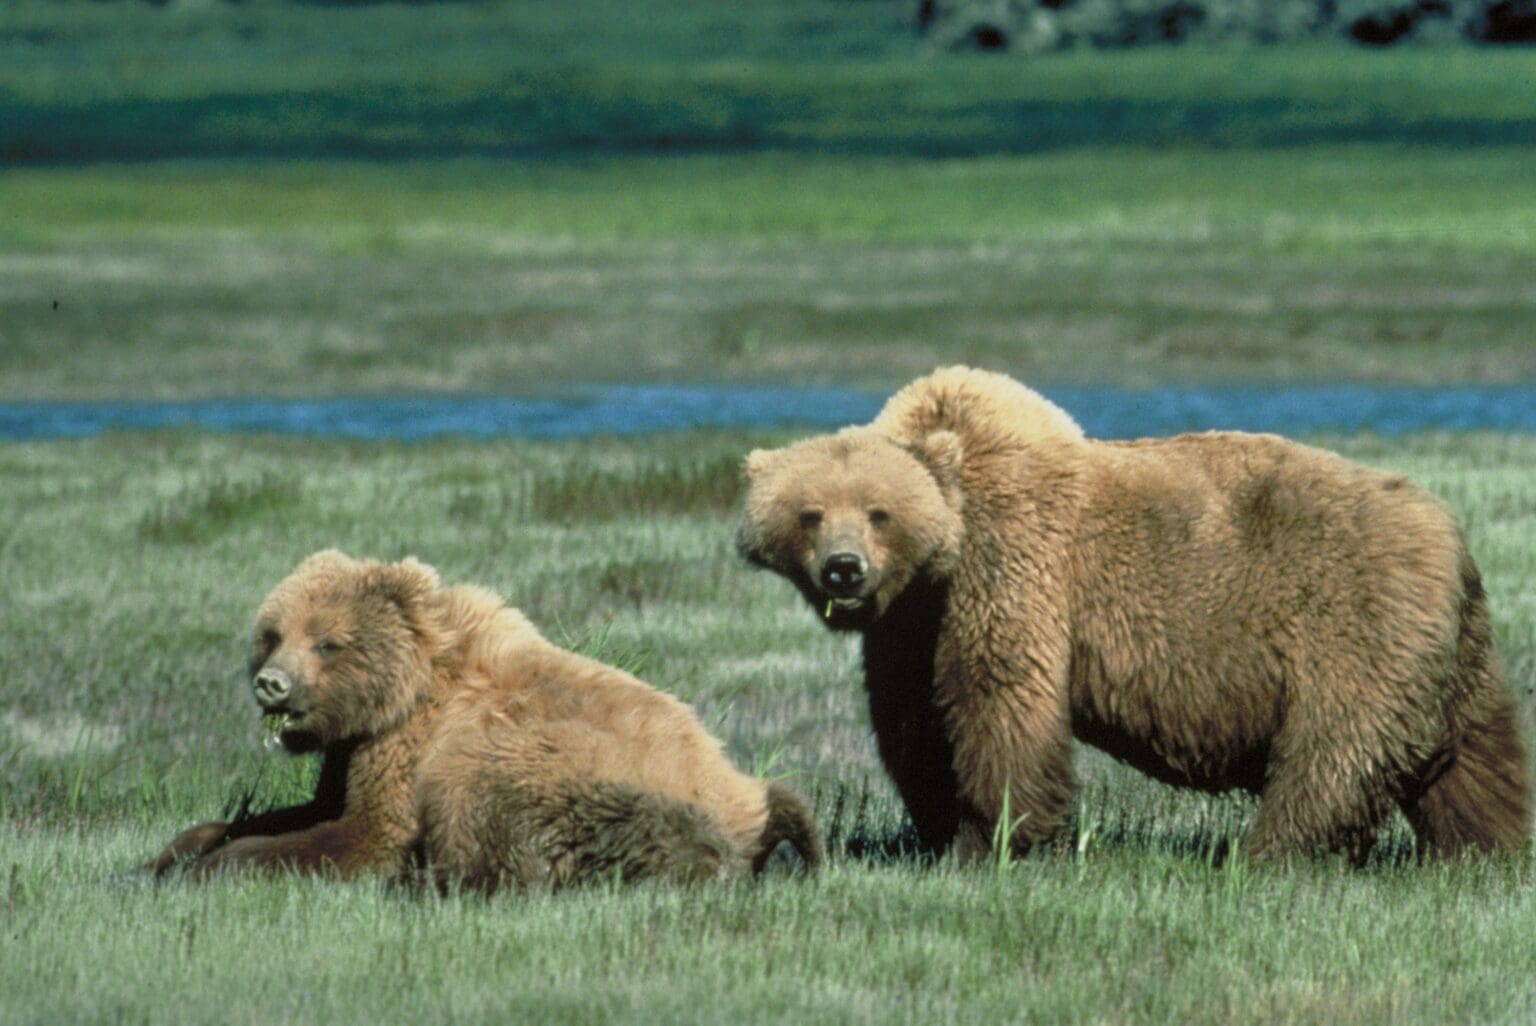 Two bears grazing on the grasslands next to each other look over to the camera in curiousity.